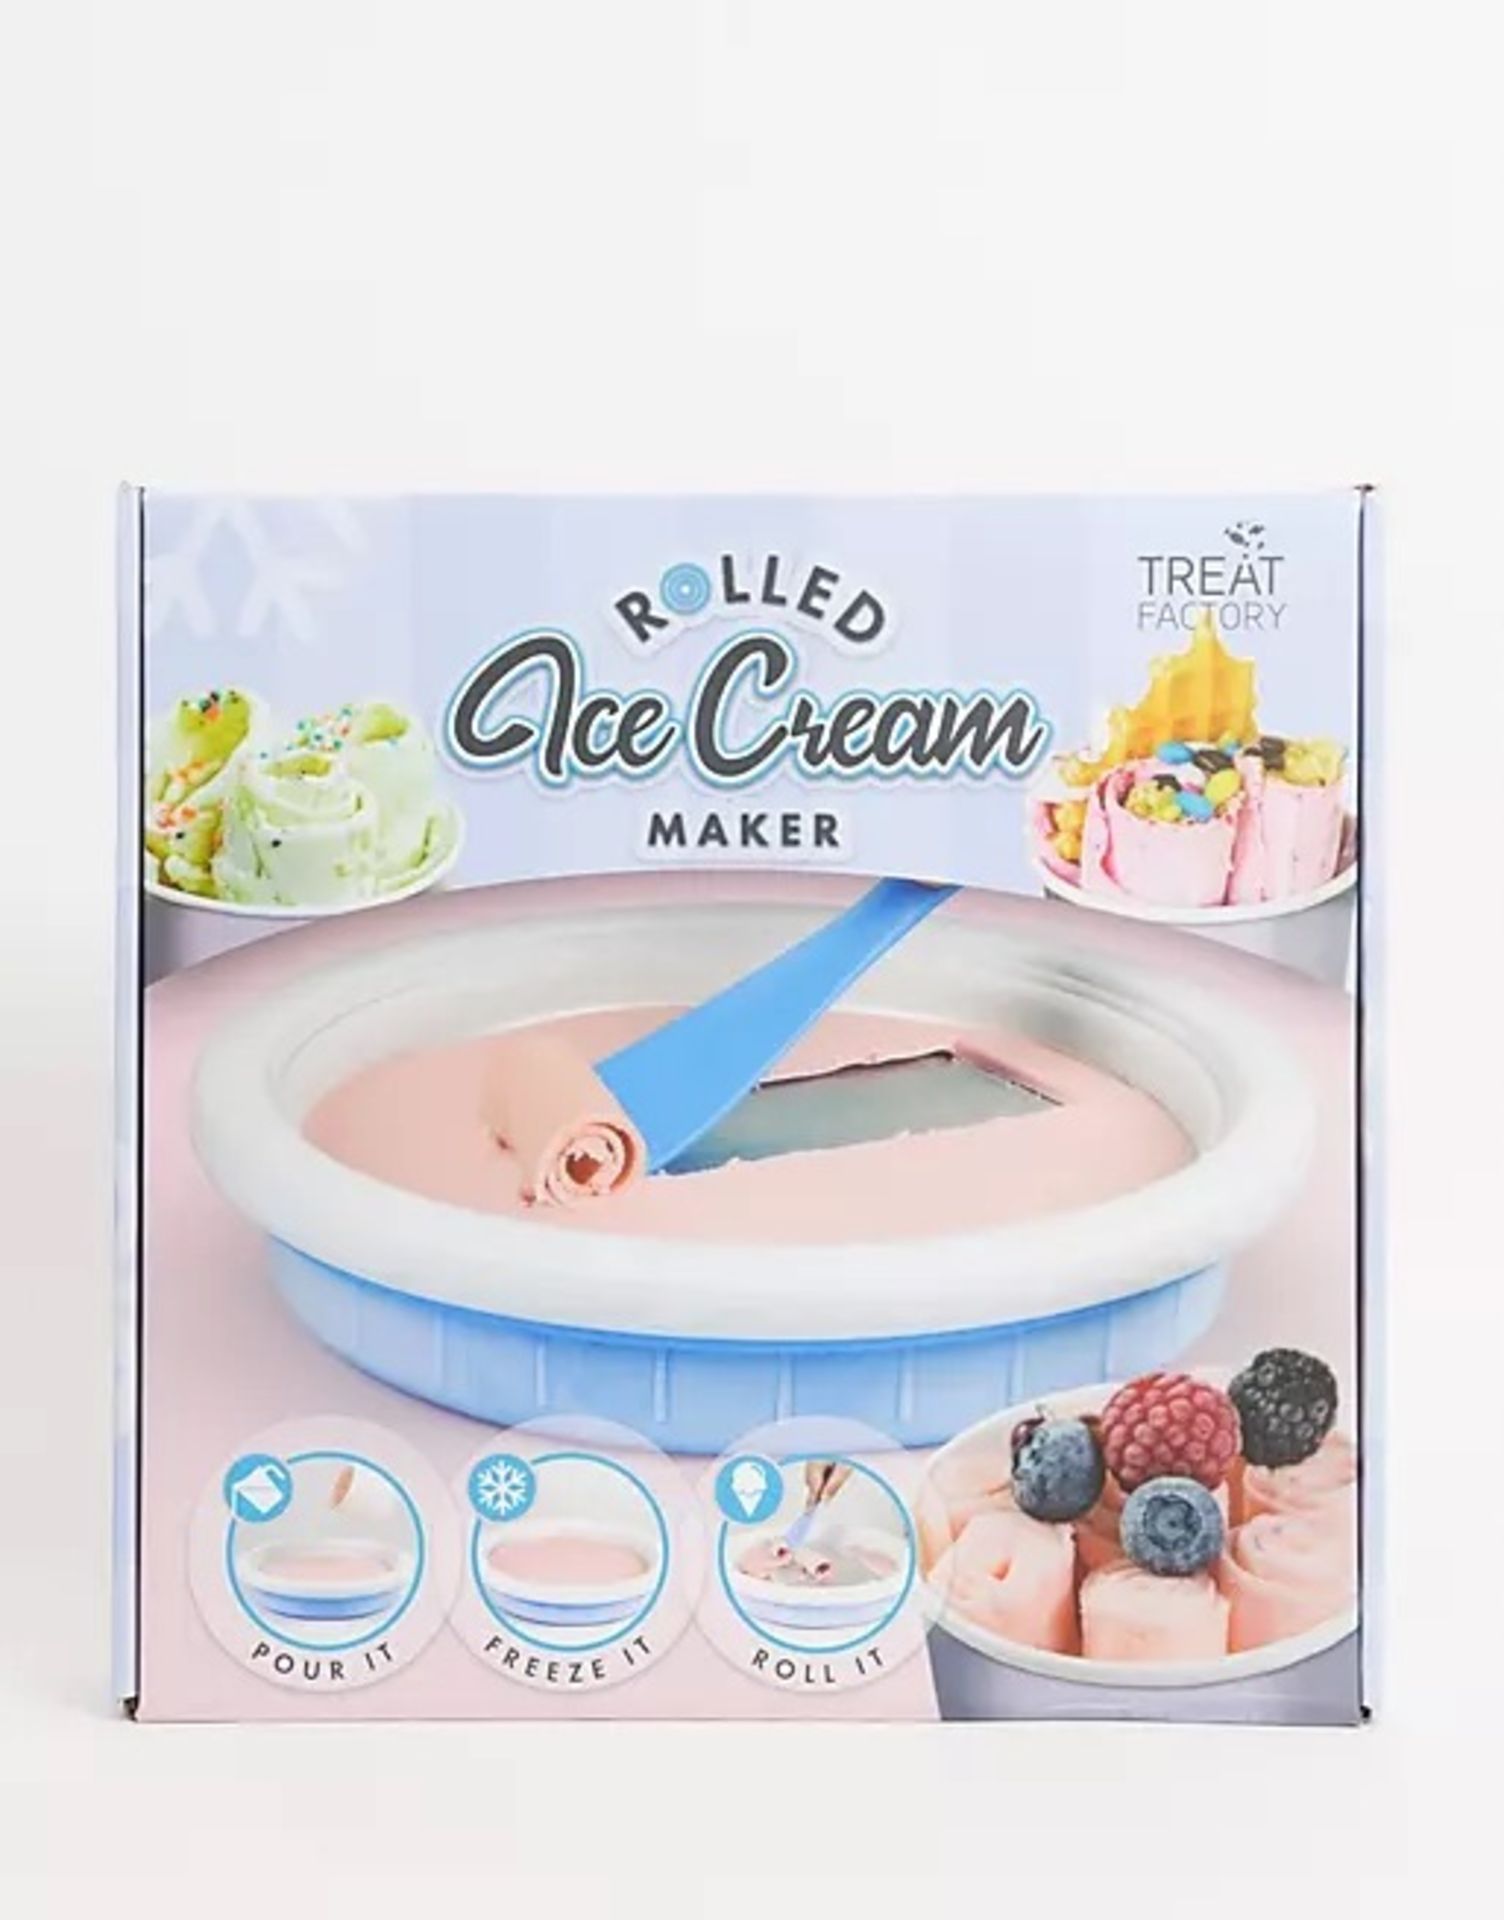 X 3 Treat Factory Rolled Ice Cream Maker RRP £30 Each